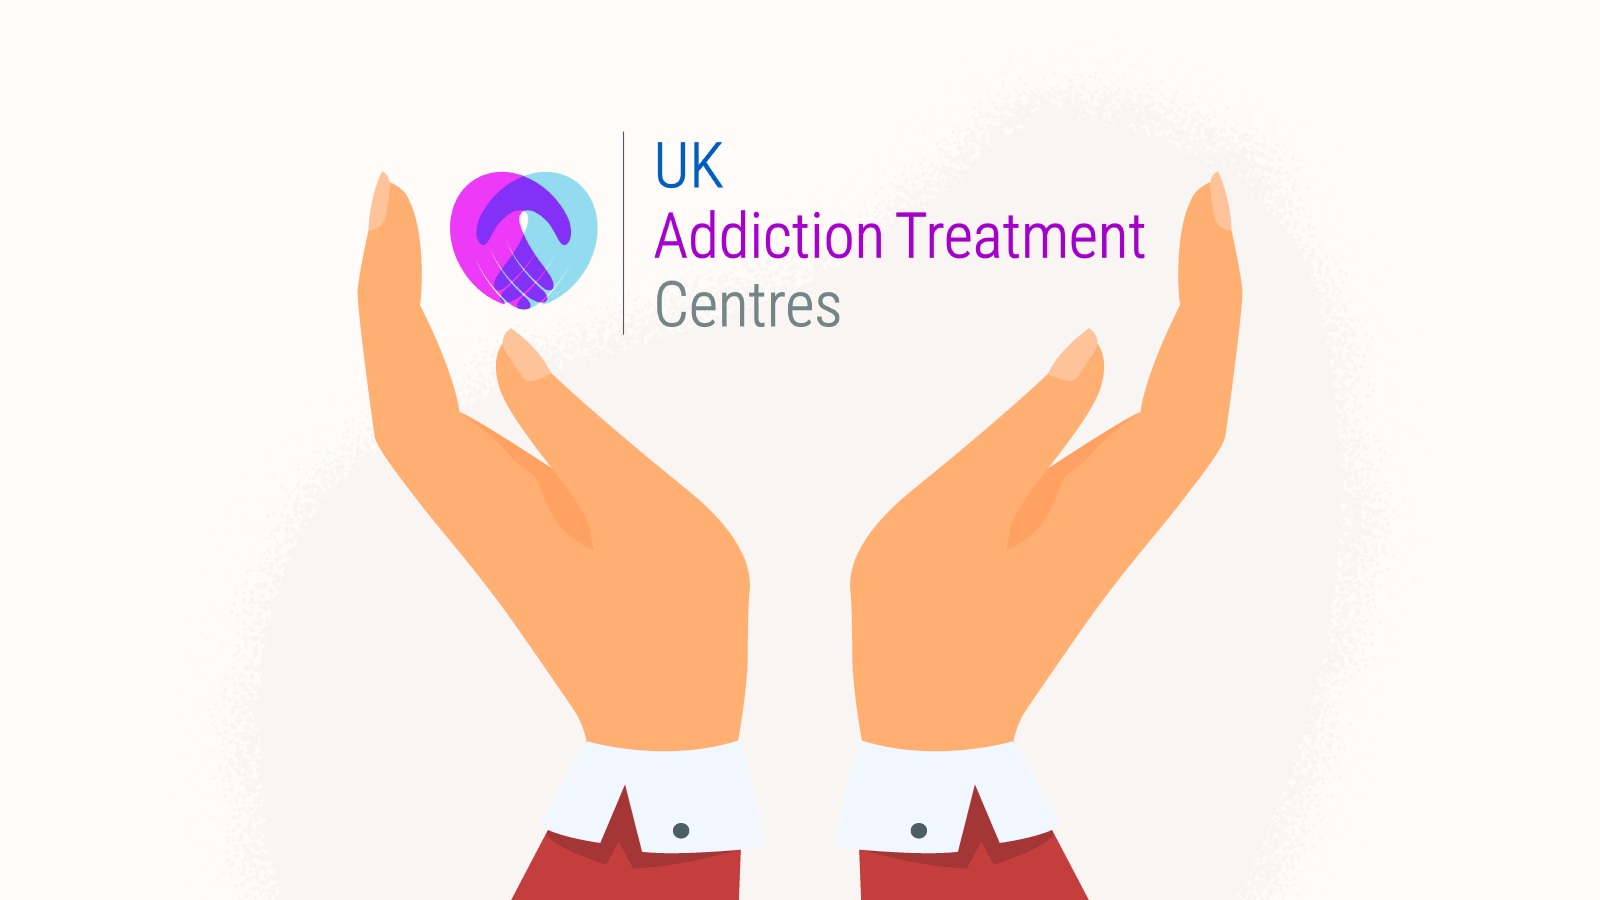 Who Can Reach Out to UK Addiction Treatment Centres